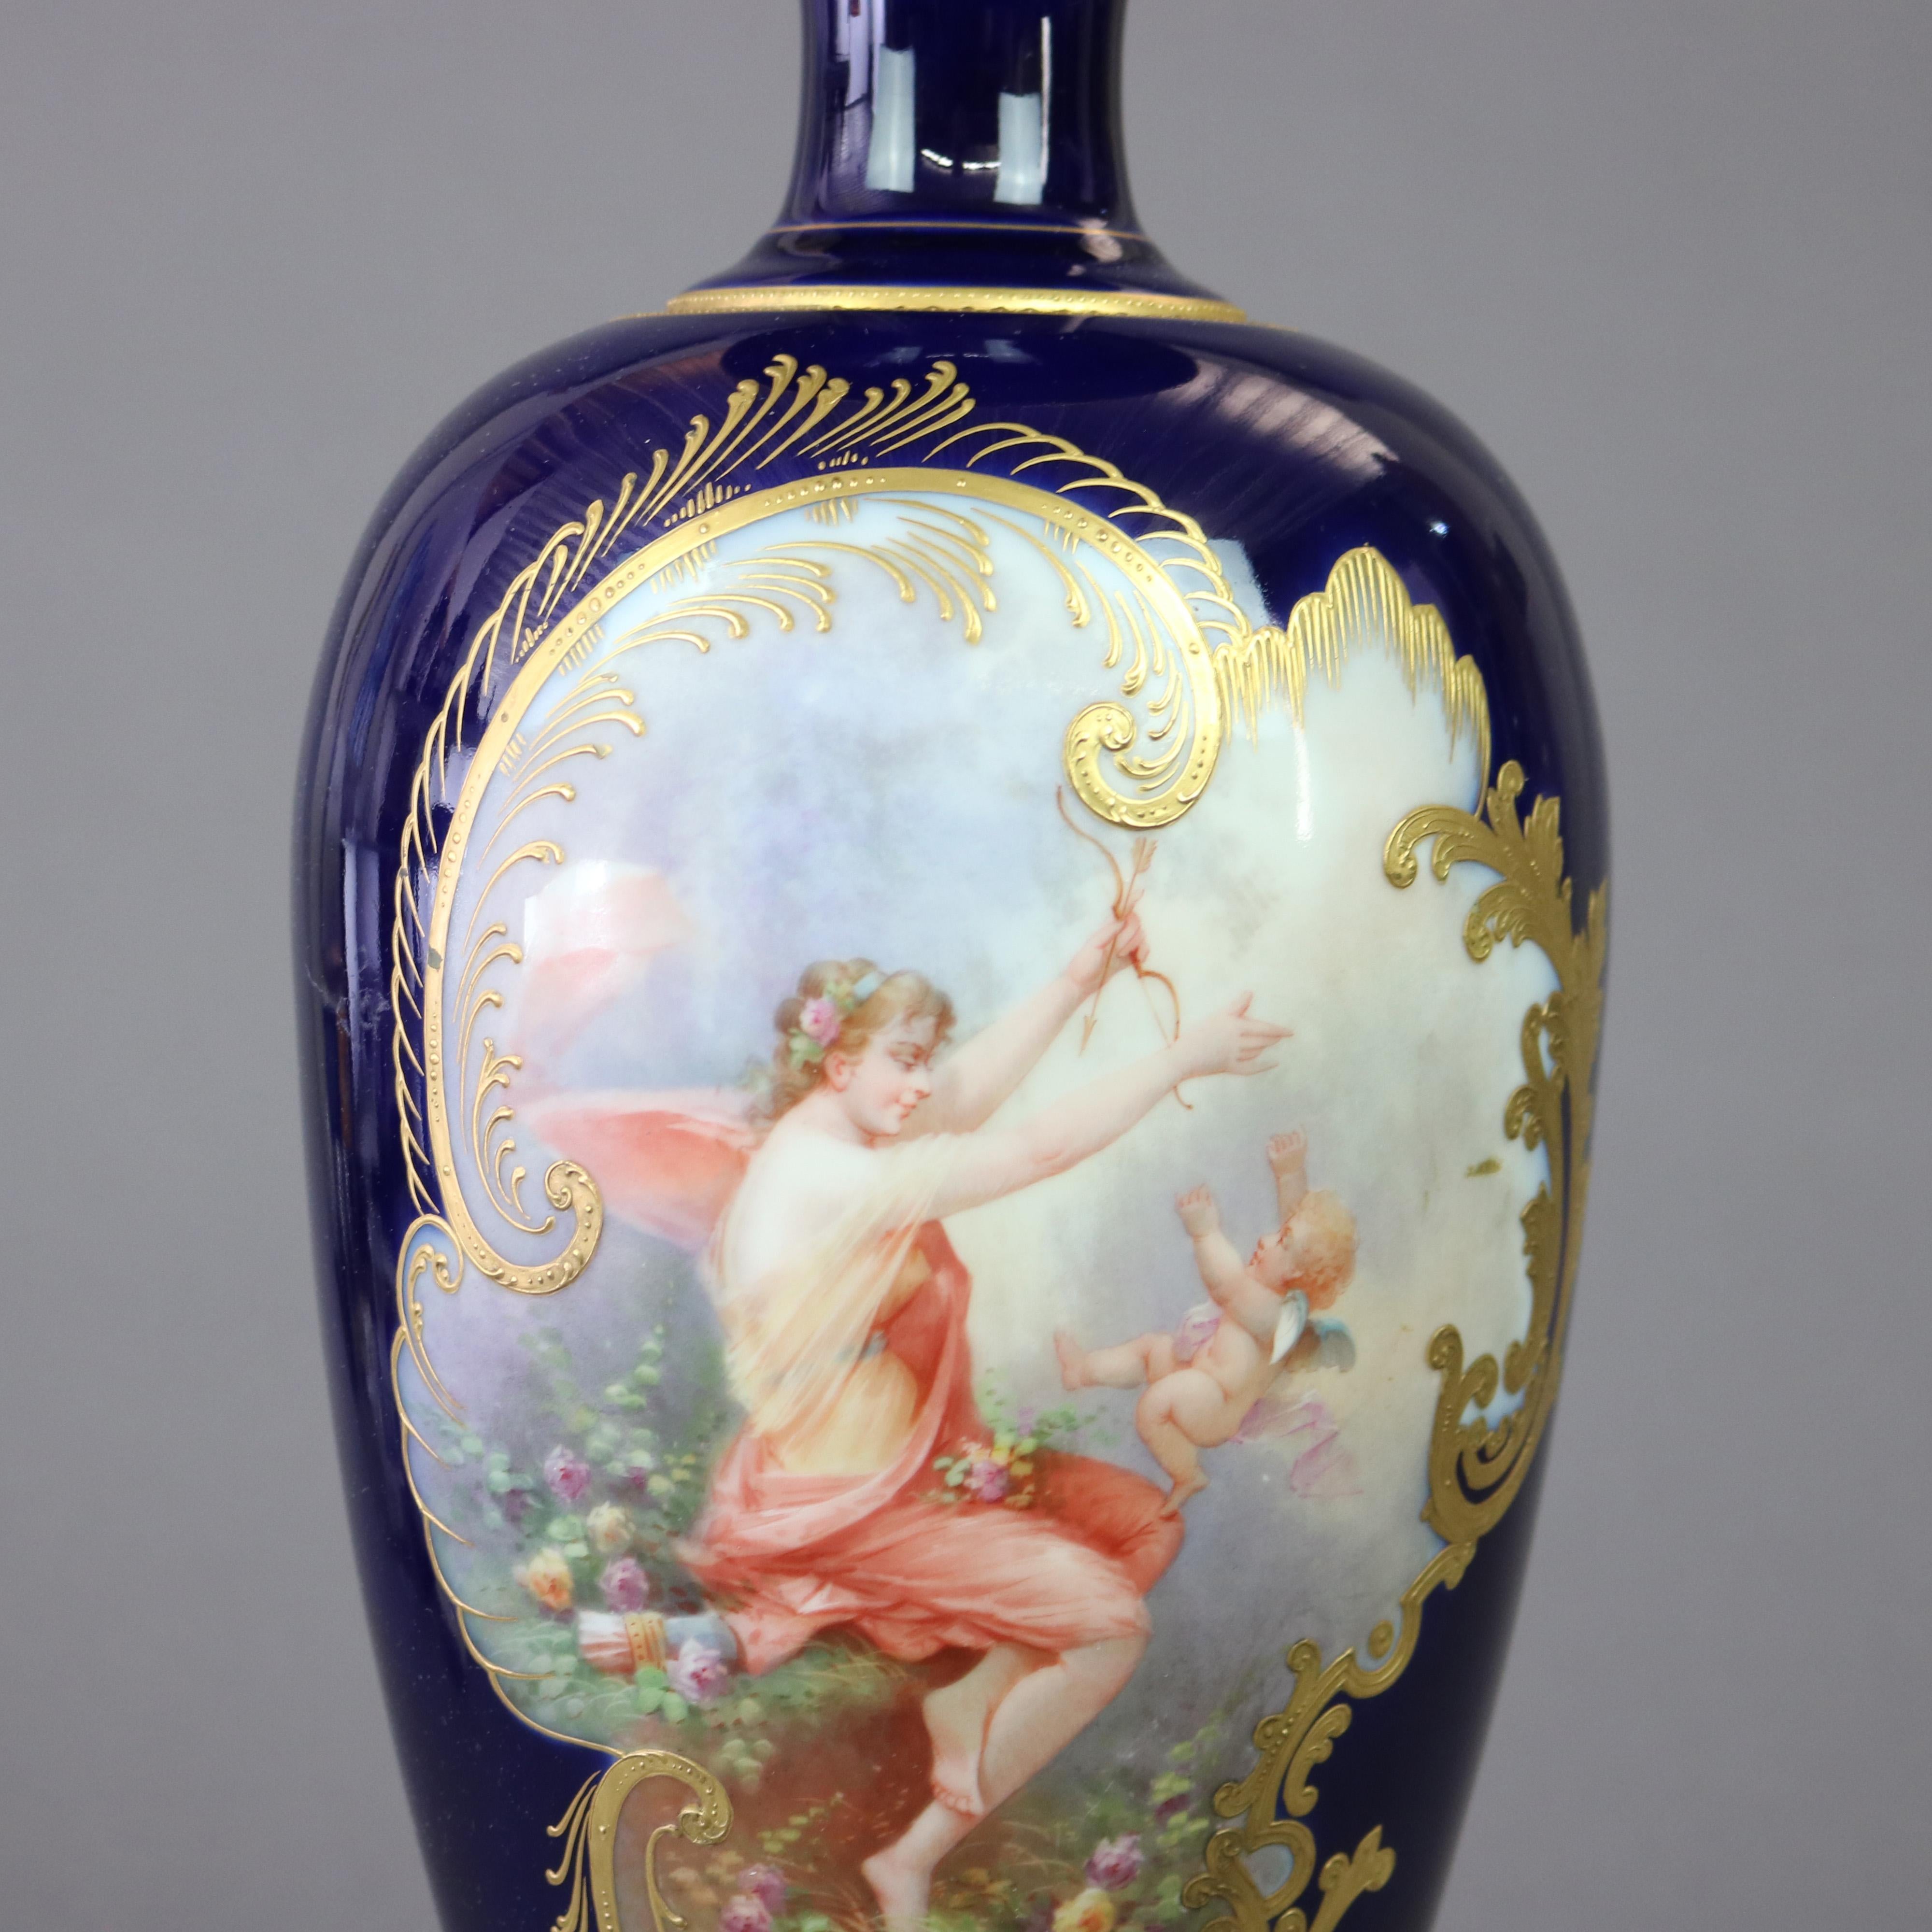 Oversized Antique Limoges Porcelain Hand Painted Allegorical Portrait Urn c1900 In Good Condition For Sale In Big Flats, NY